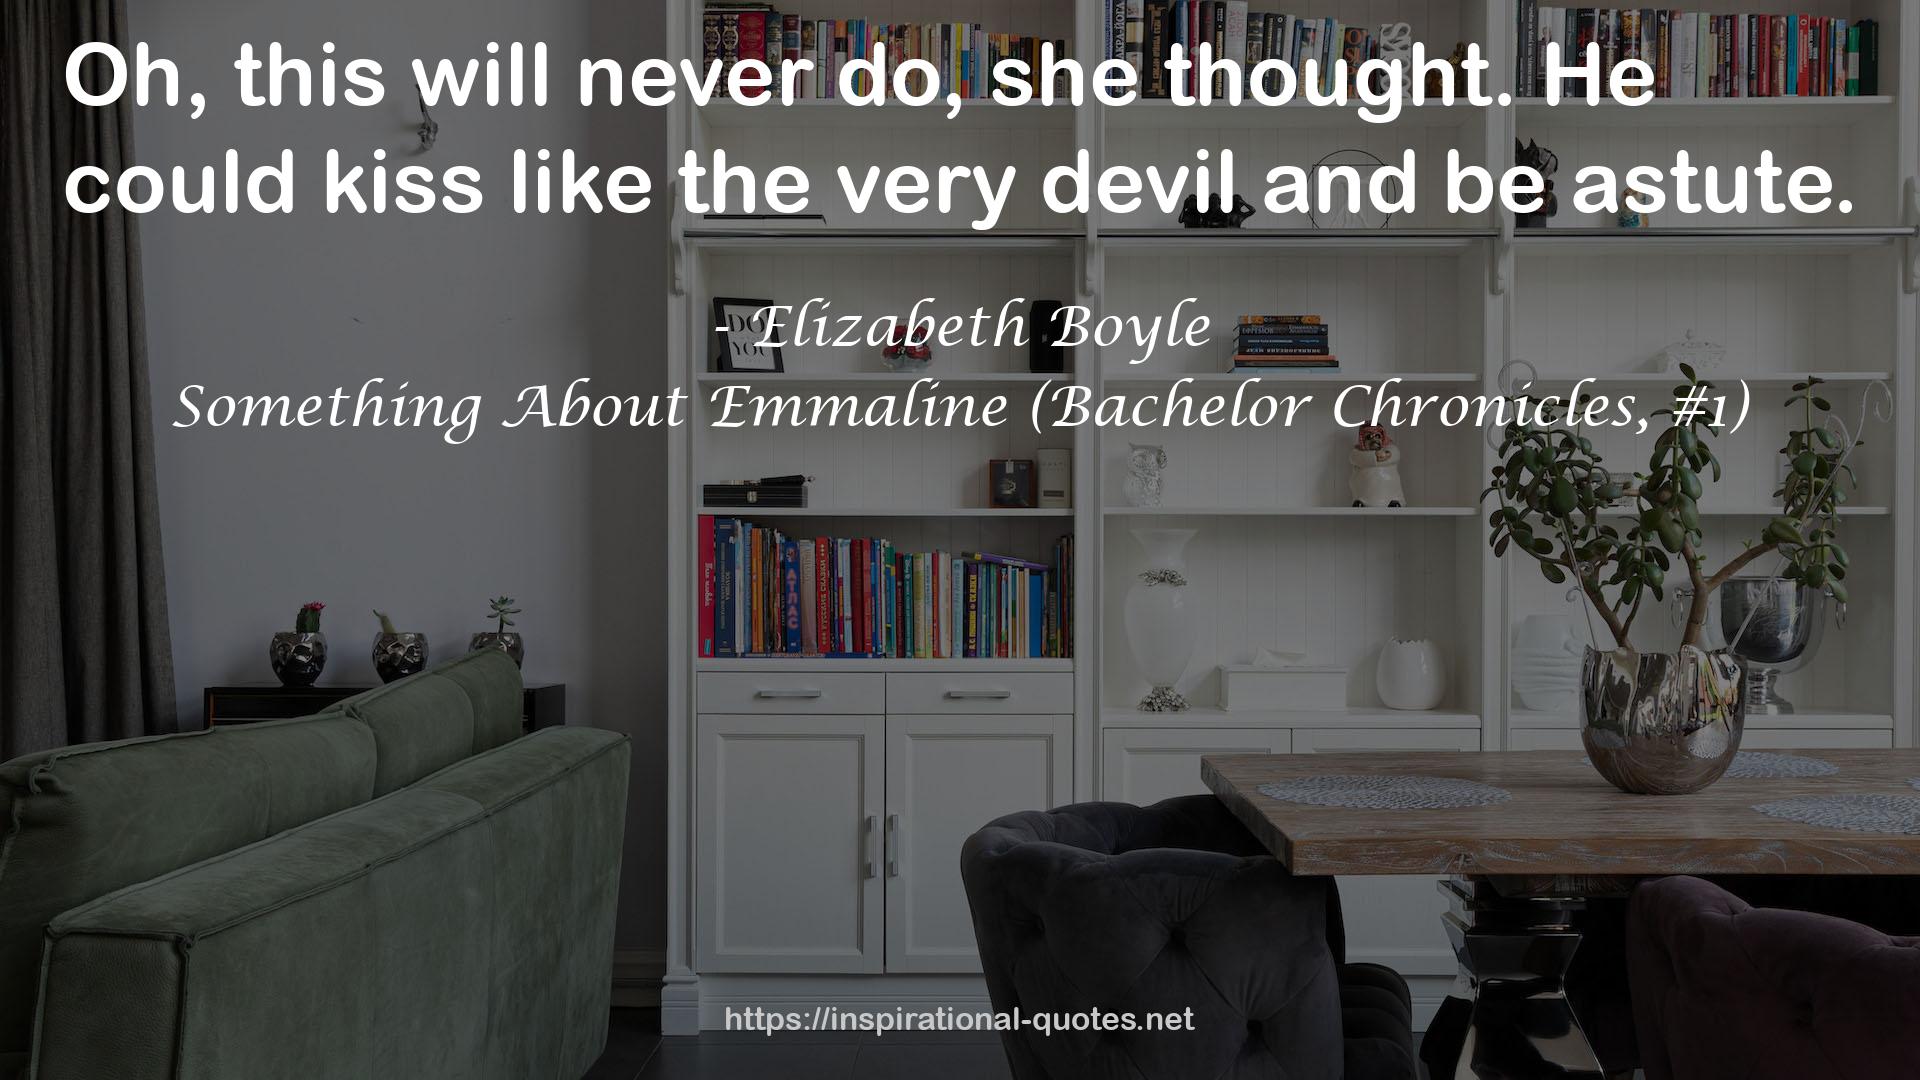 Something About Emmaline (Bachelor Chronicles, #1) QUOTES